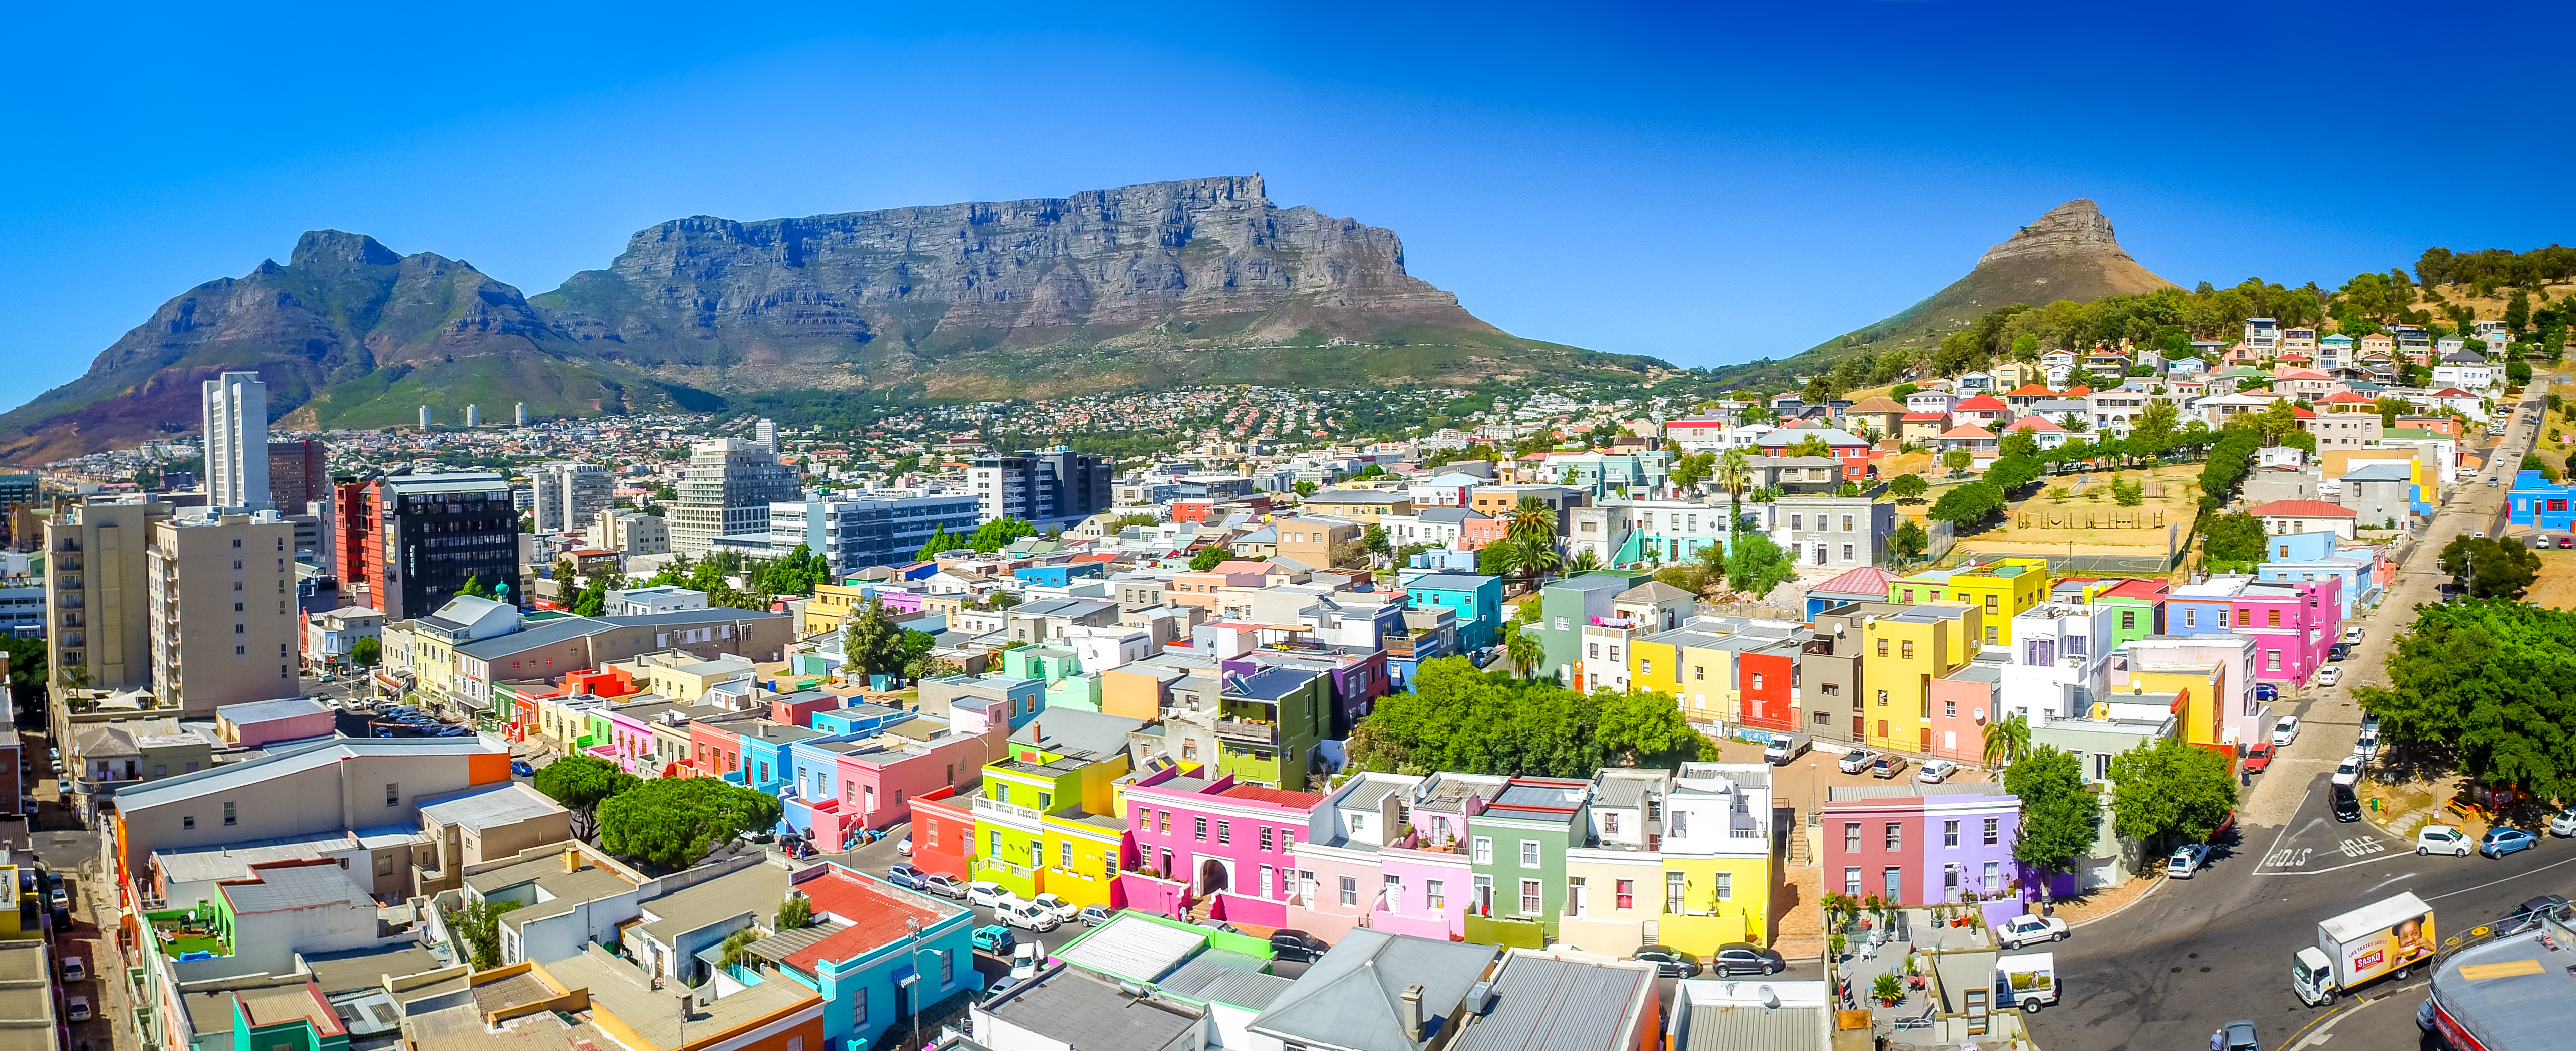 Cape Town Mountains South Africa Table Mountain City Building 5127x2092